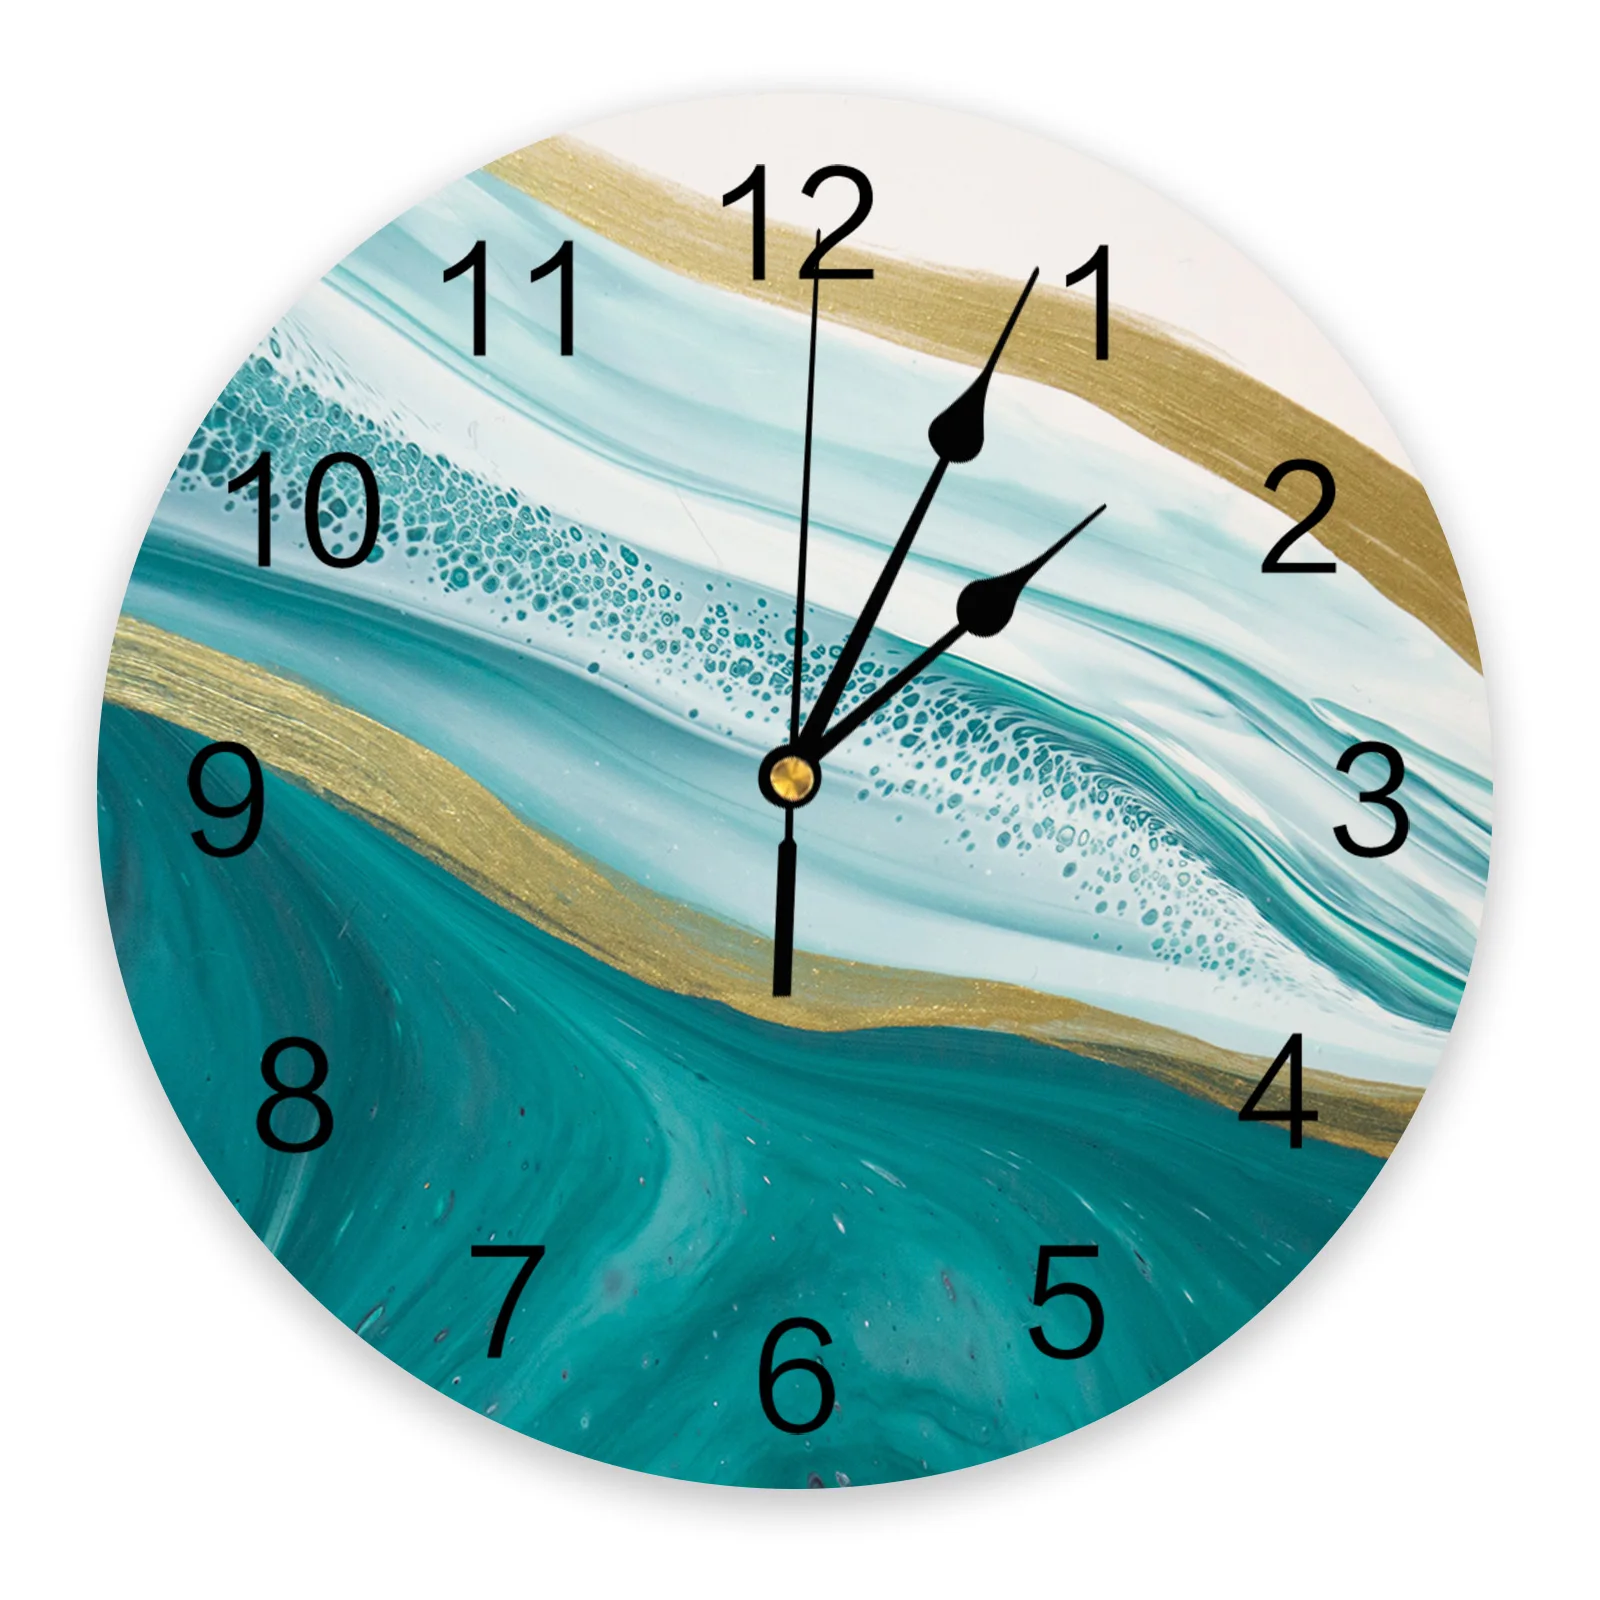 Creative Wall Clock Teal Gradient Marble Pattern Modern Design Living Room Bedroom Office Cafe Home Decor Fashion Wall Clock